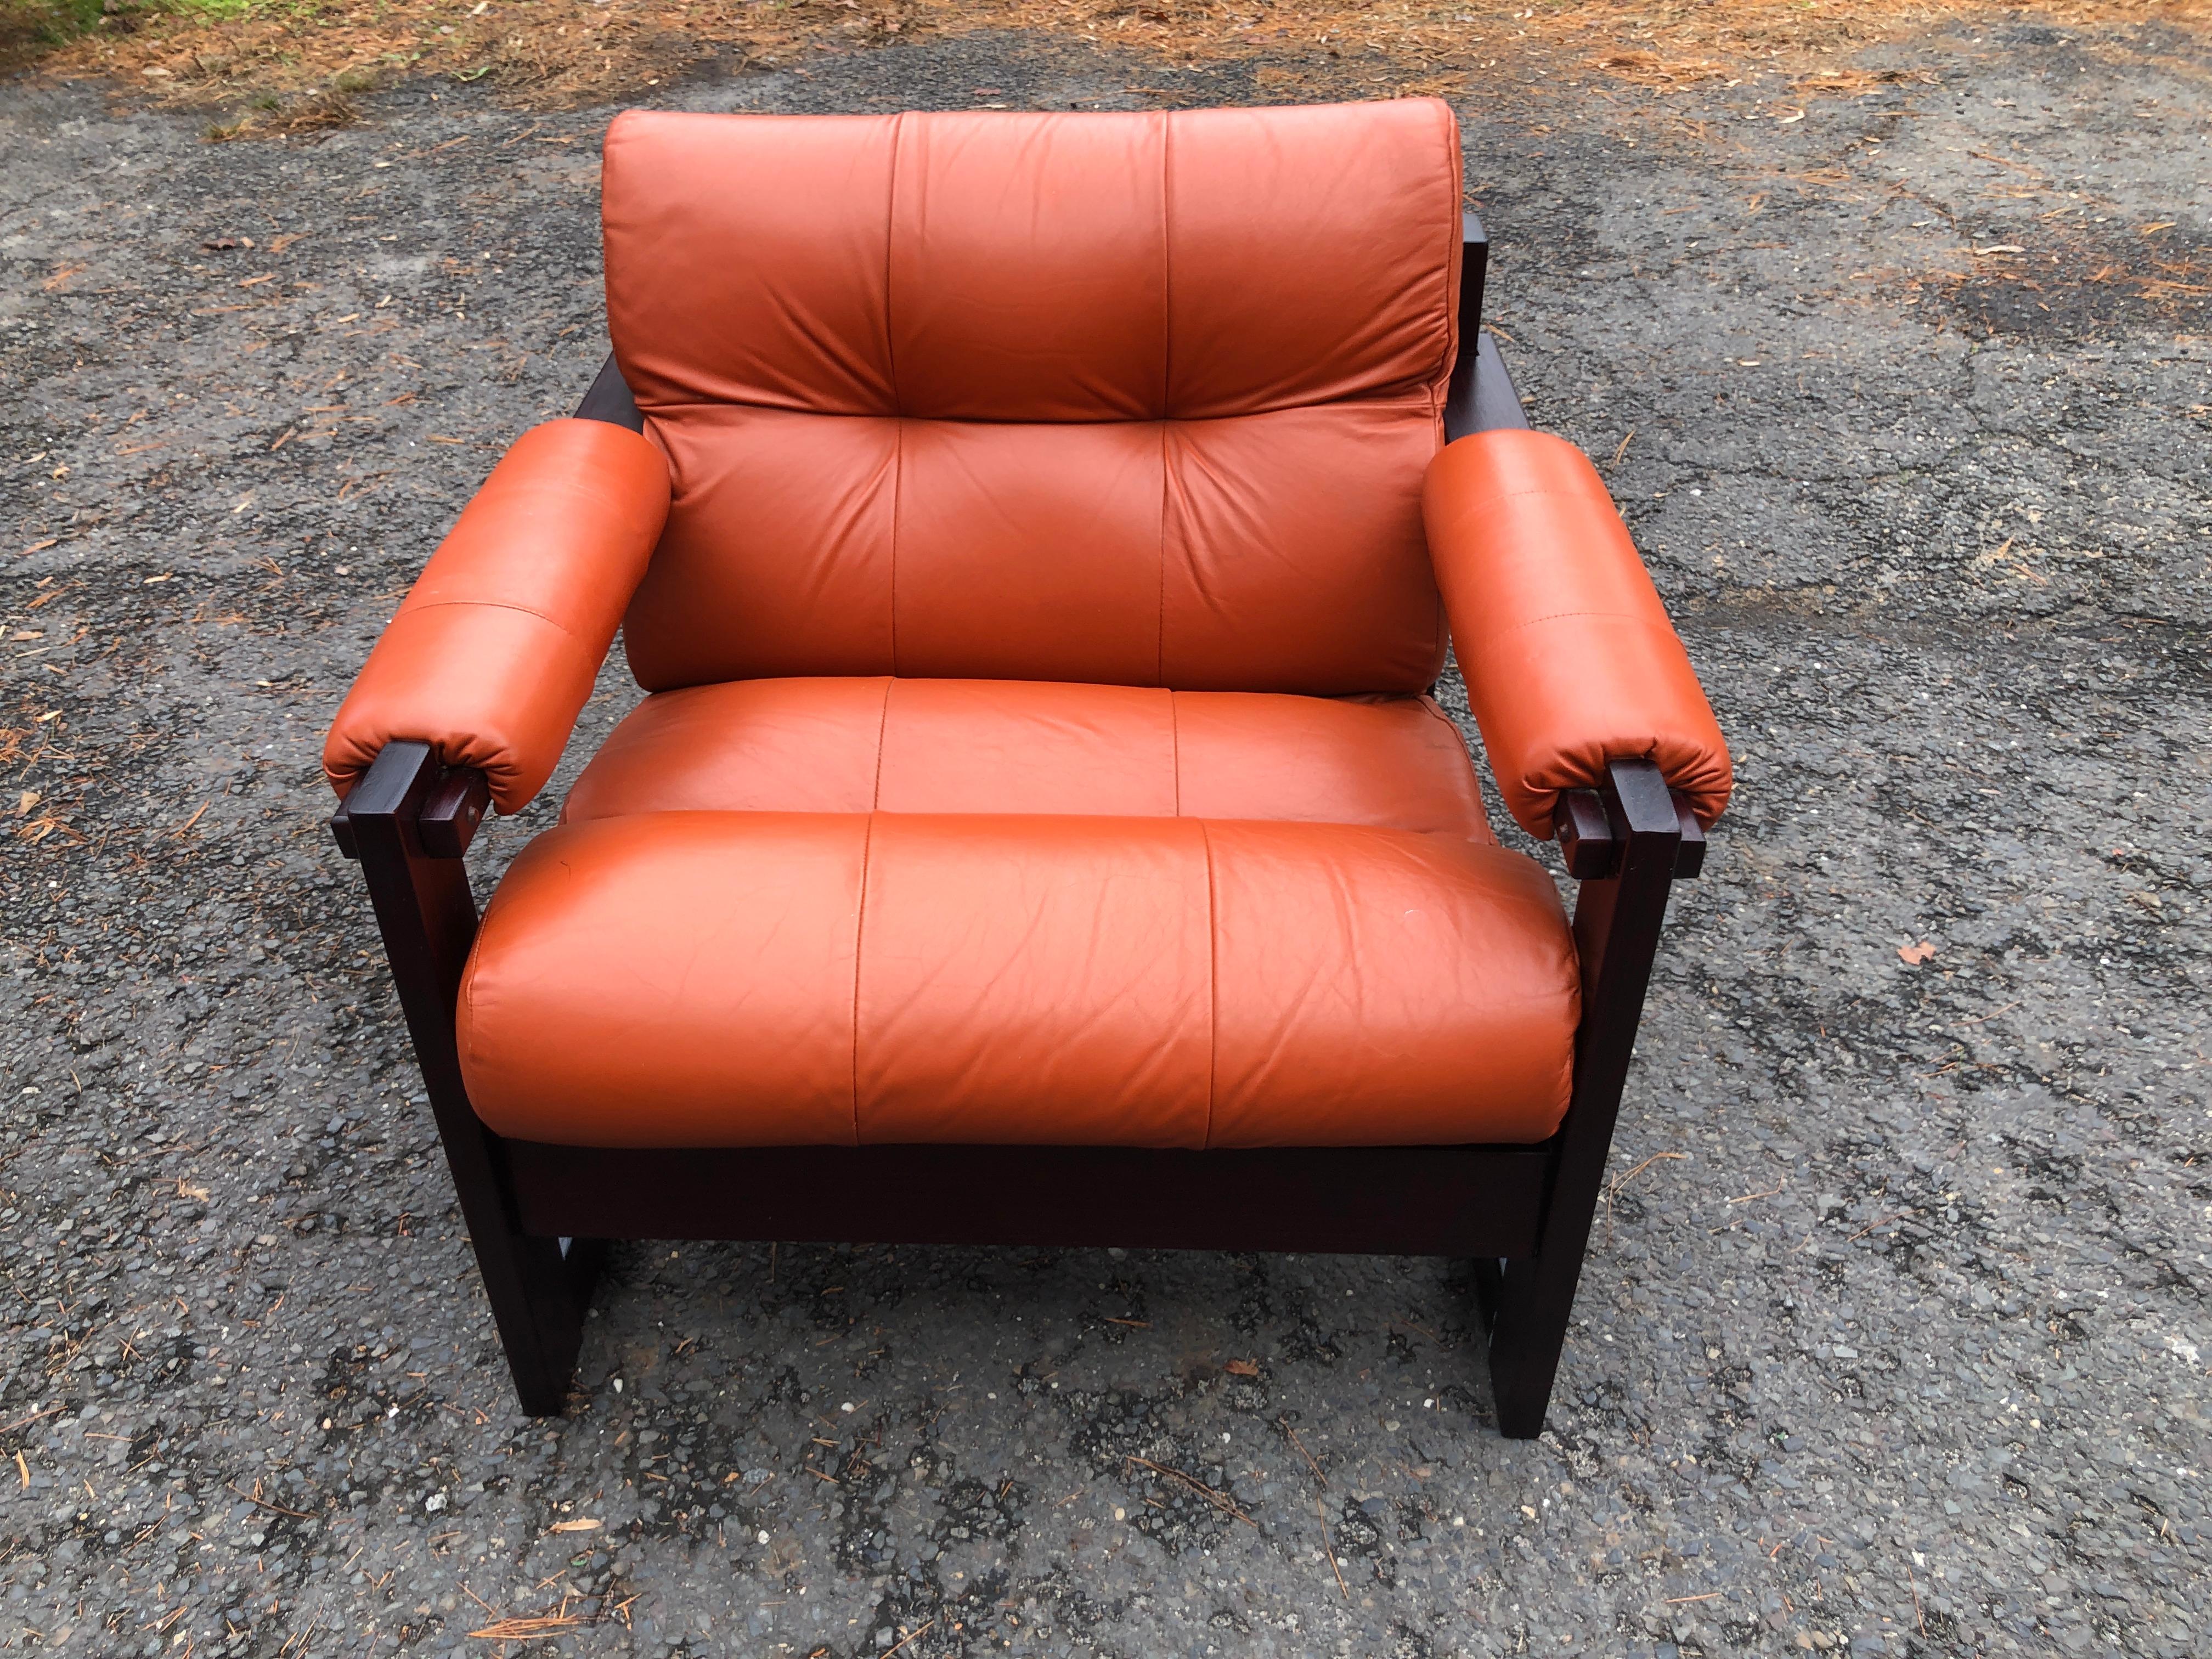 Wonderful Percival Lafer rosewood and leather S-1 lounge chair.  Lafer's S-1 design features Brazilian exoticness paired with Scandinavian sensibility.  Of Lafer's designs, the S-1 is a bit more rare to find than some of his more common ones such as